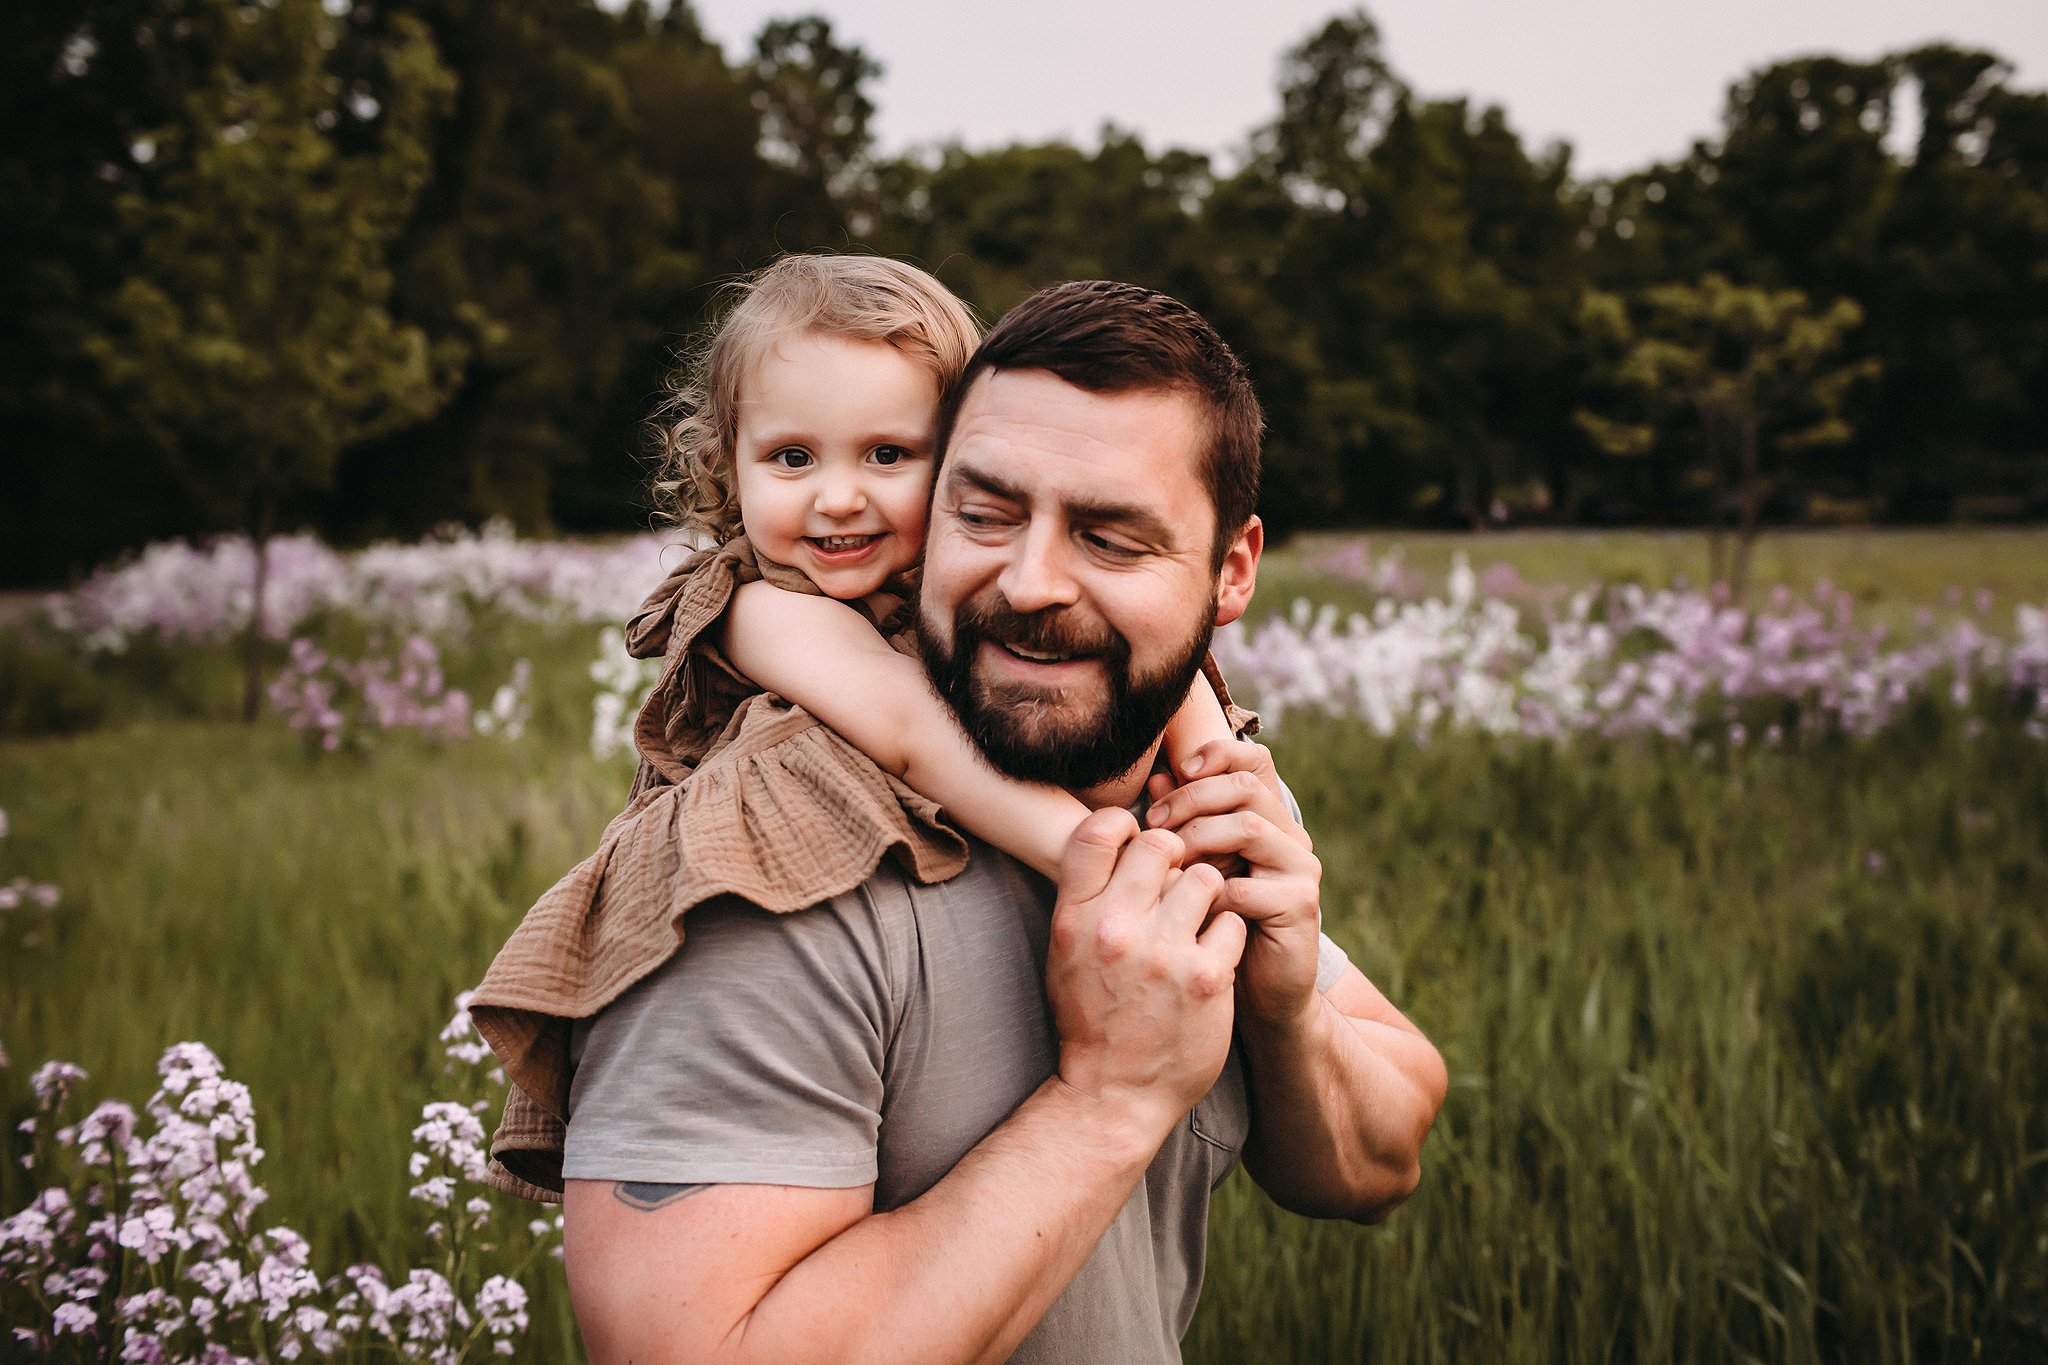 Little girl smiling with dad